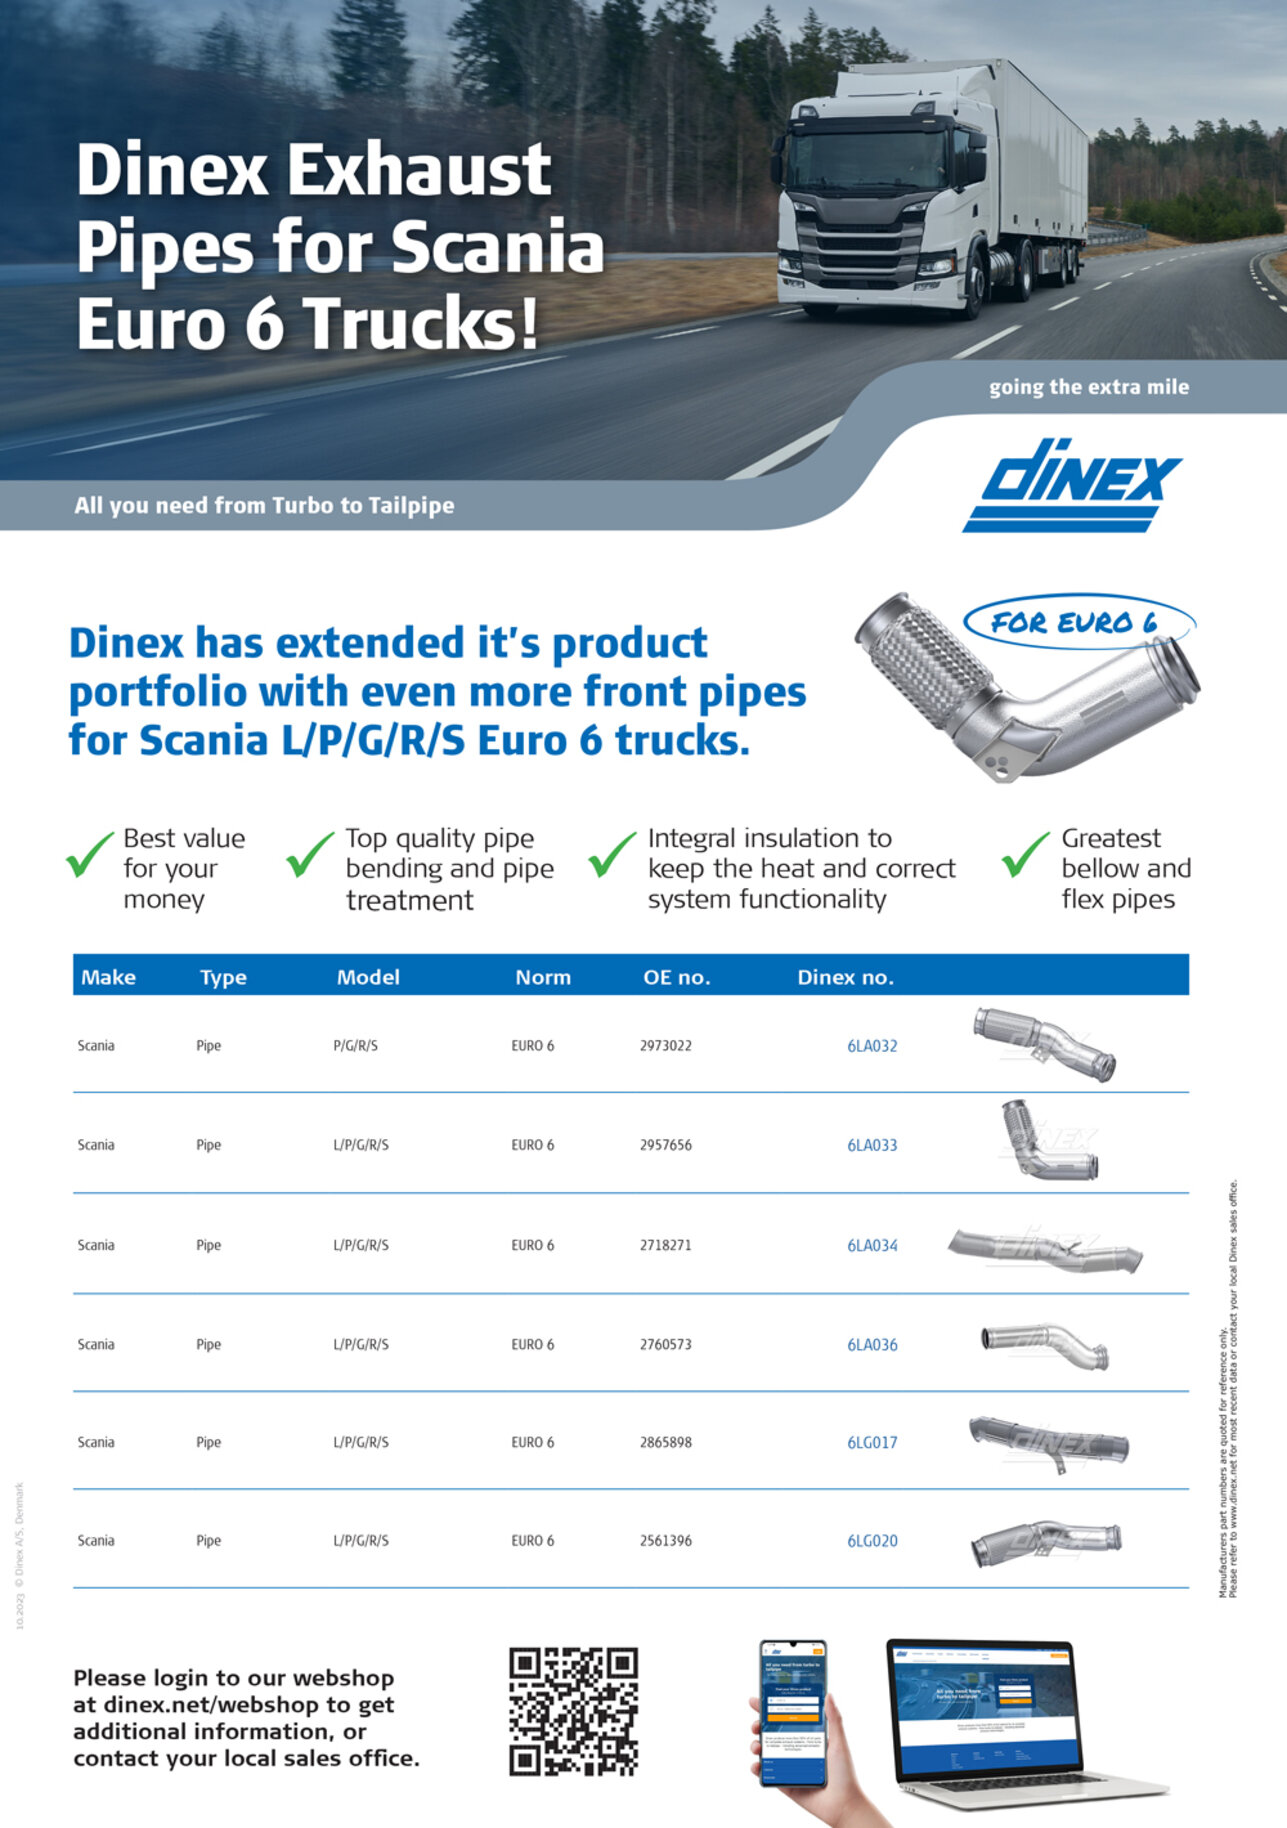 Dinex Exhaust Pipes for Scania Euro 6 Trucks!